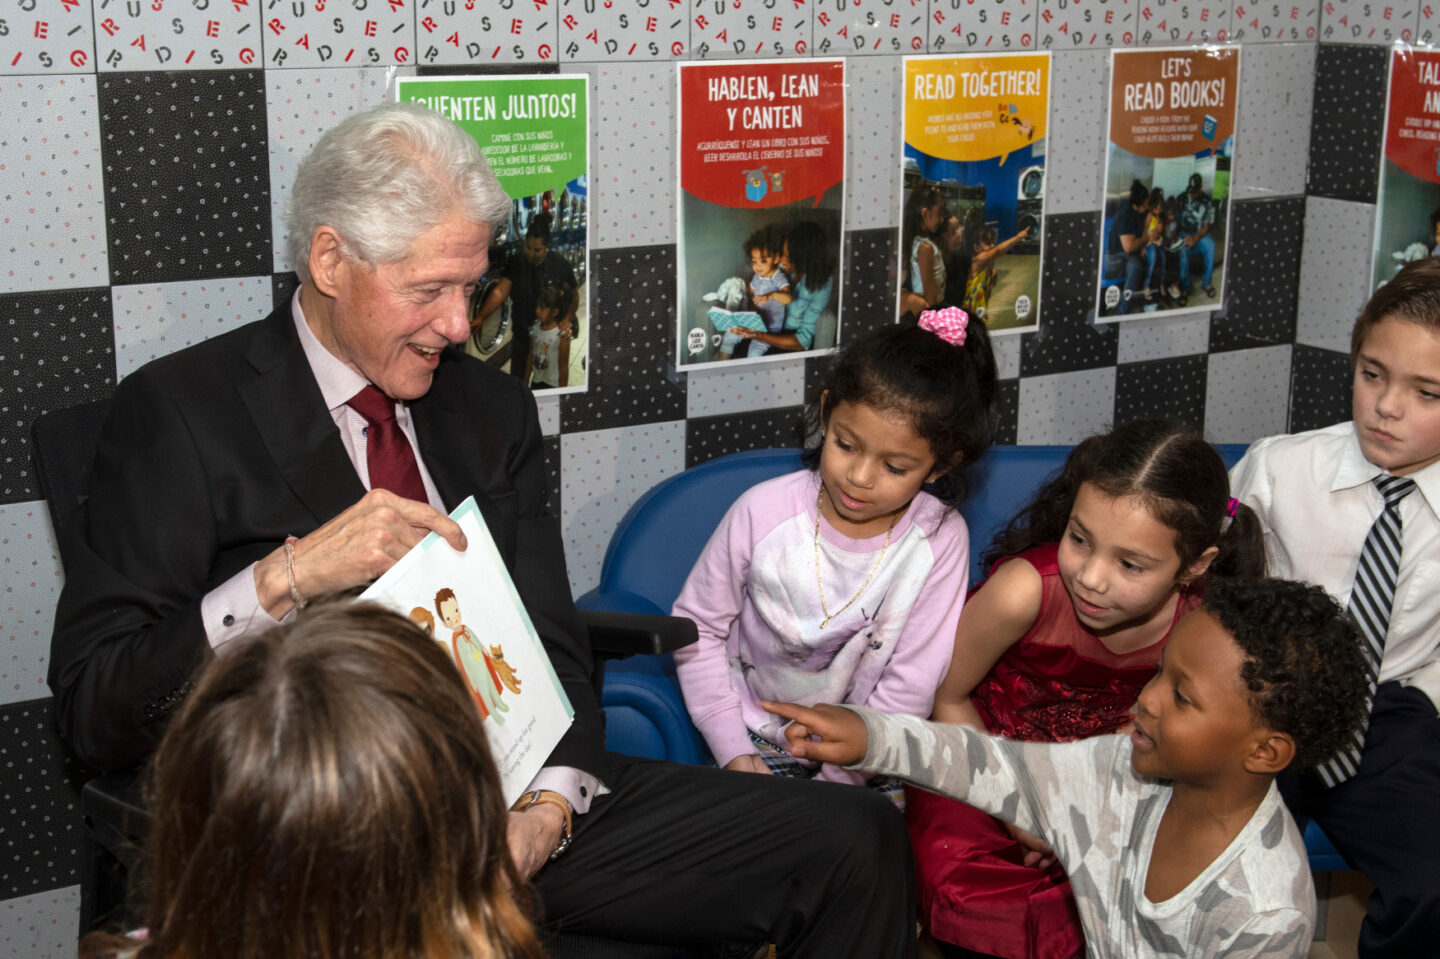 President Clinton reads a book to a group of children.